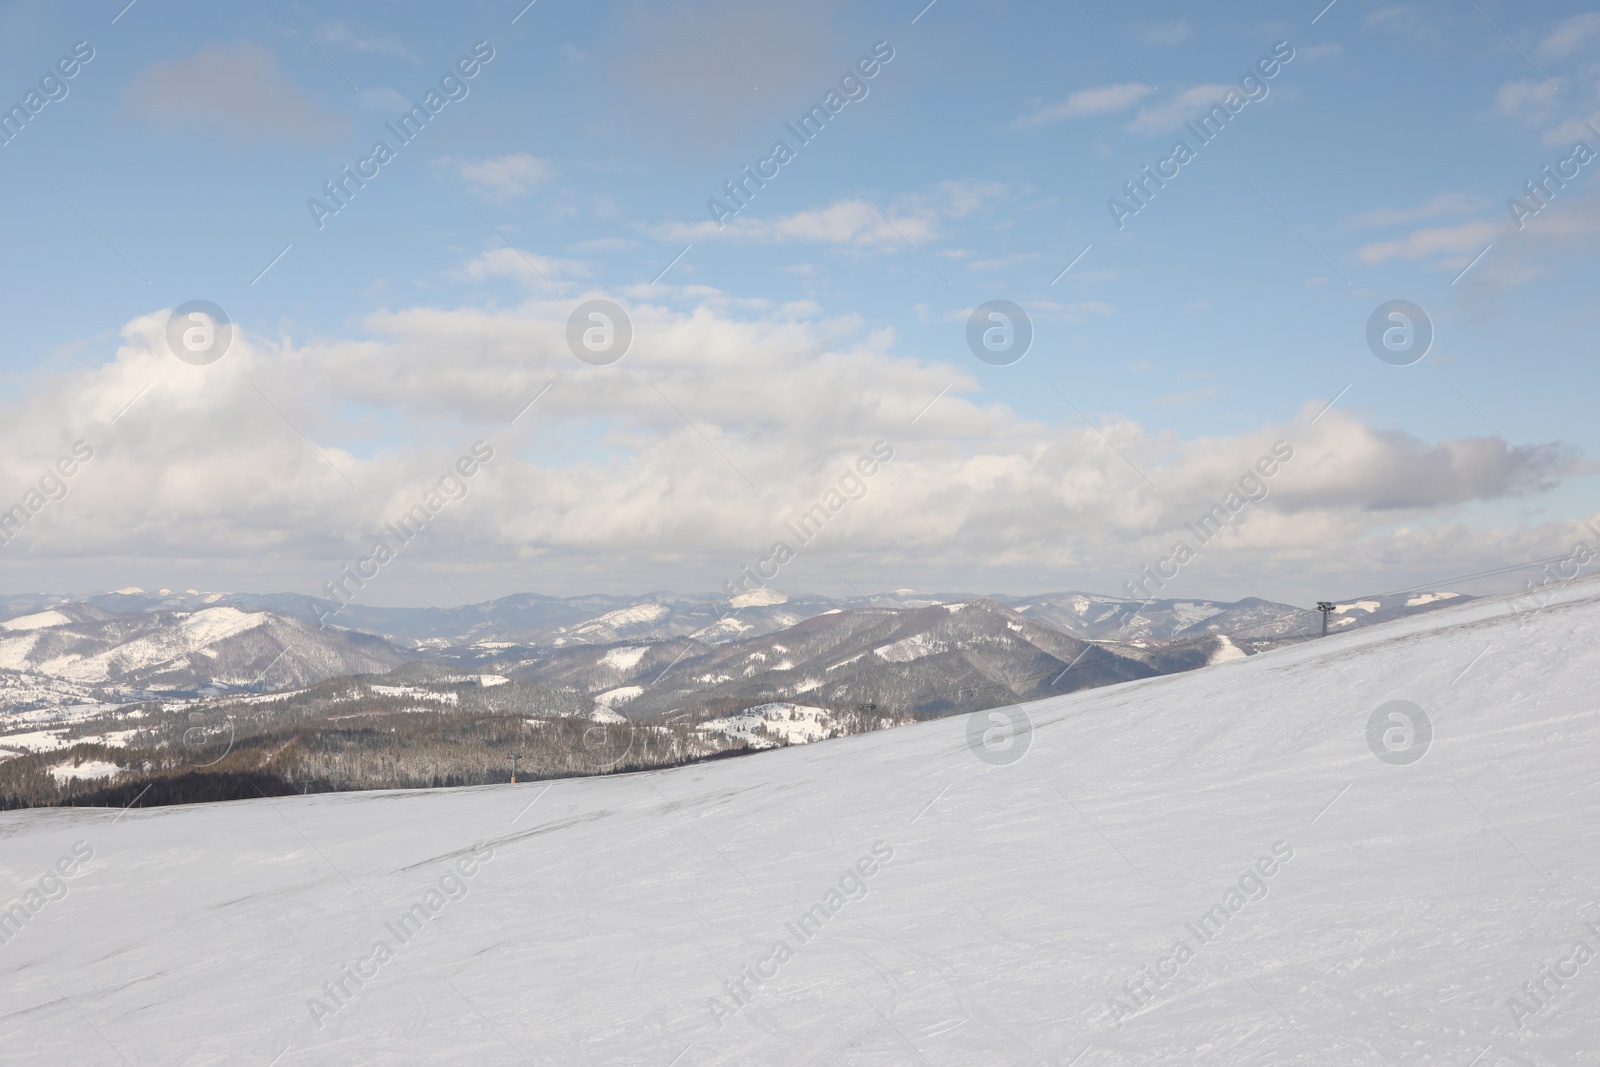 Photo of Picturesque mountain landscape with snowy hills in winter